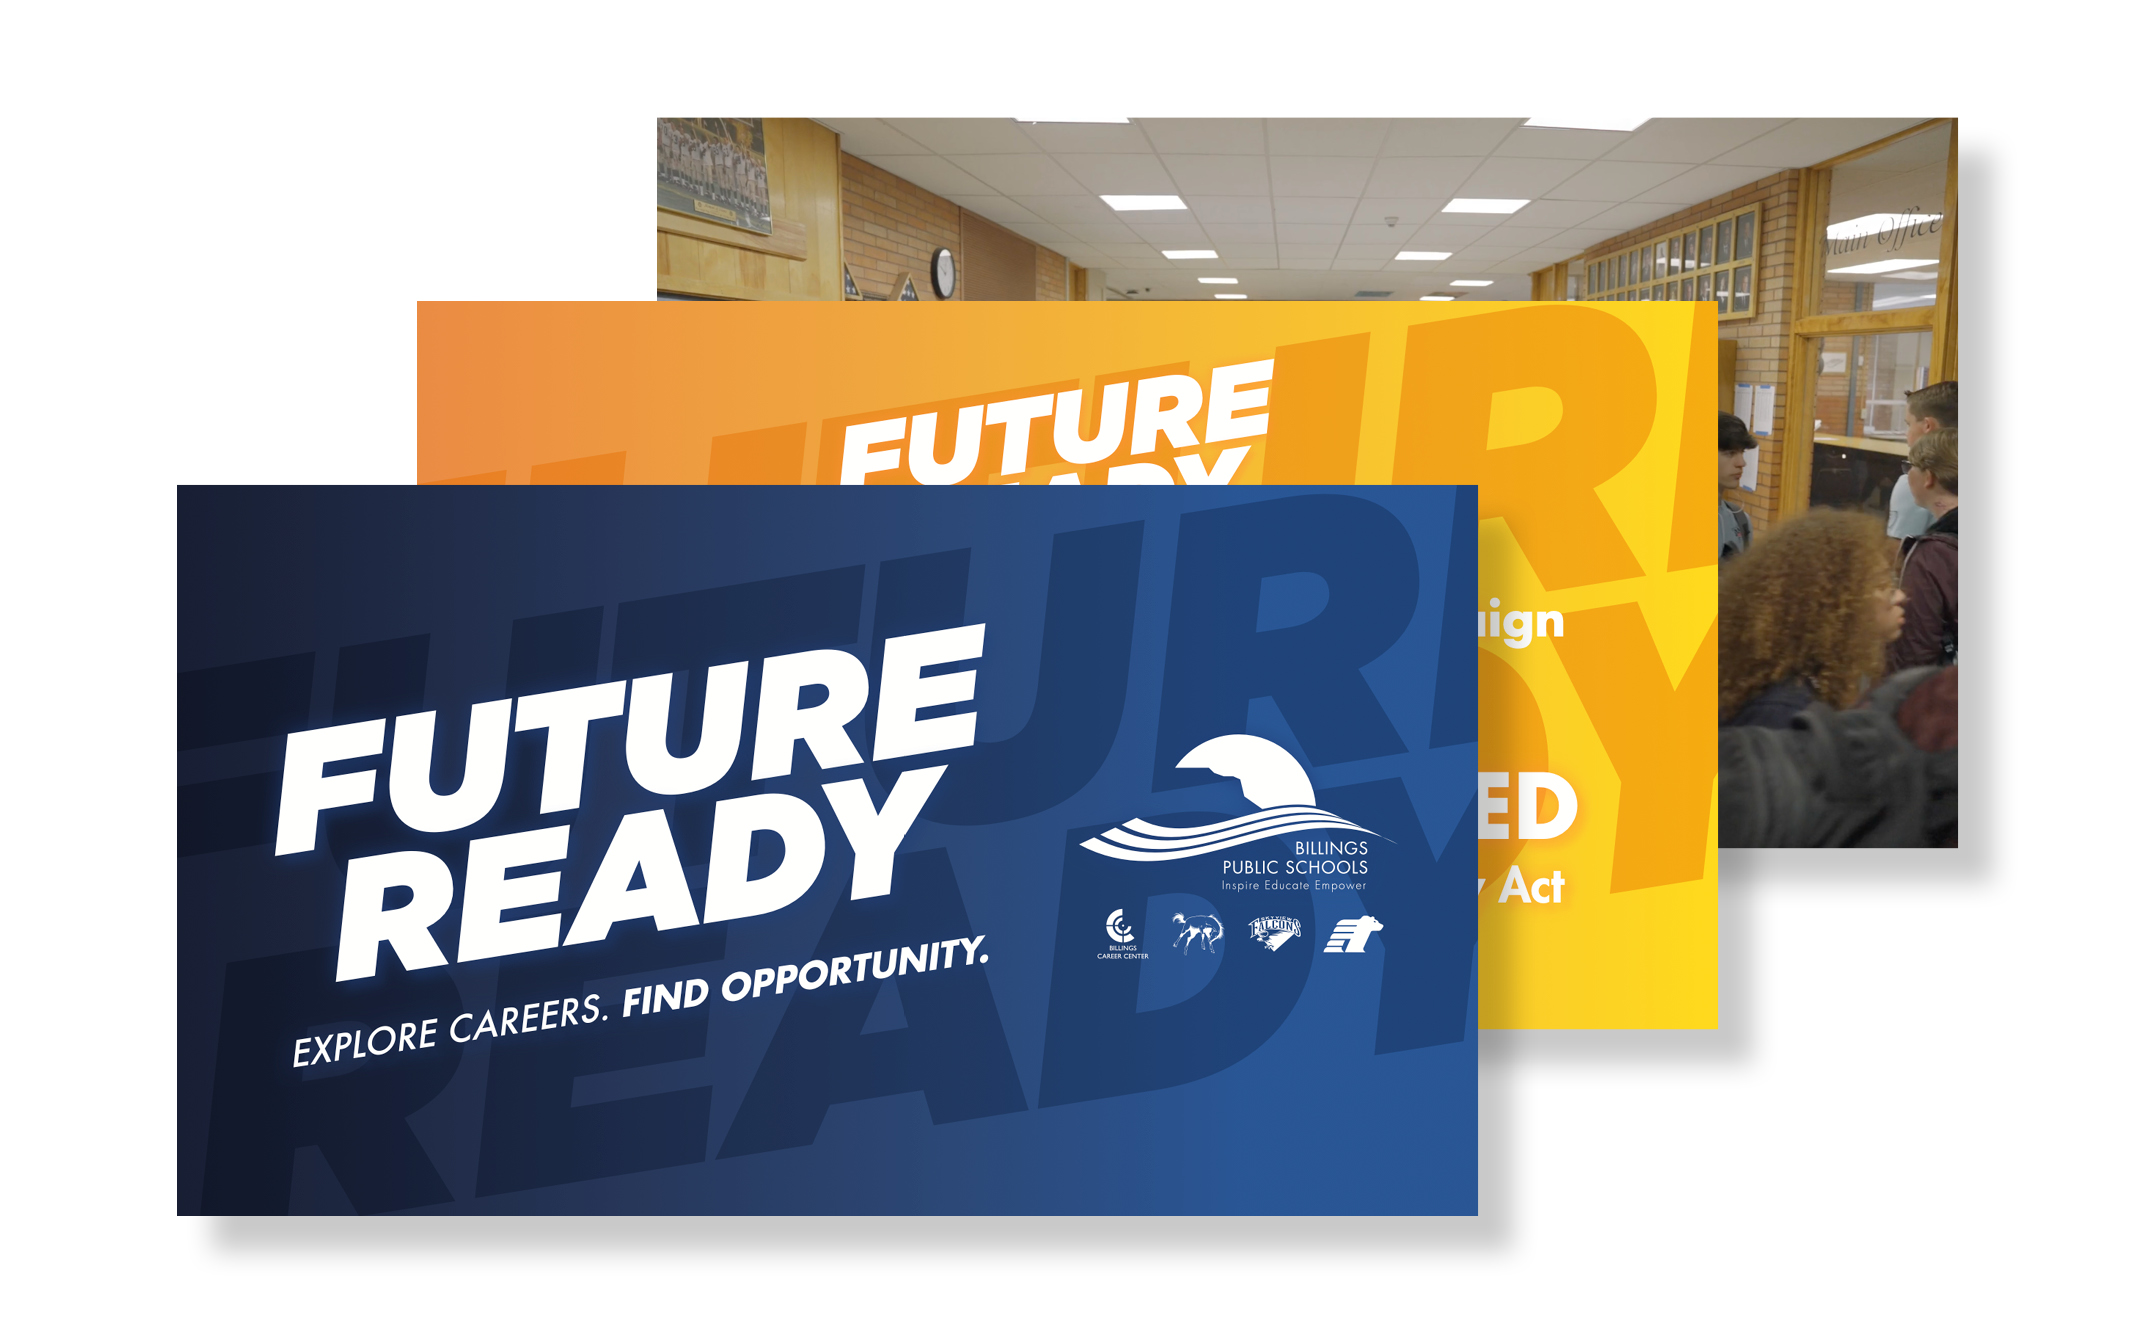 Kinetic shot and produced 7 videos for the public school district's Future Ready that prepares students in various career paths before graduating high school.